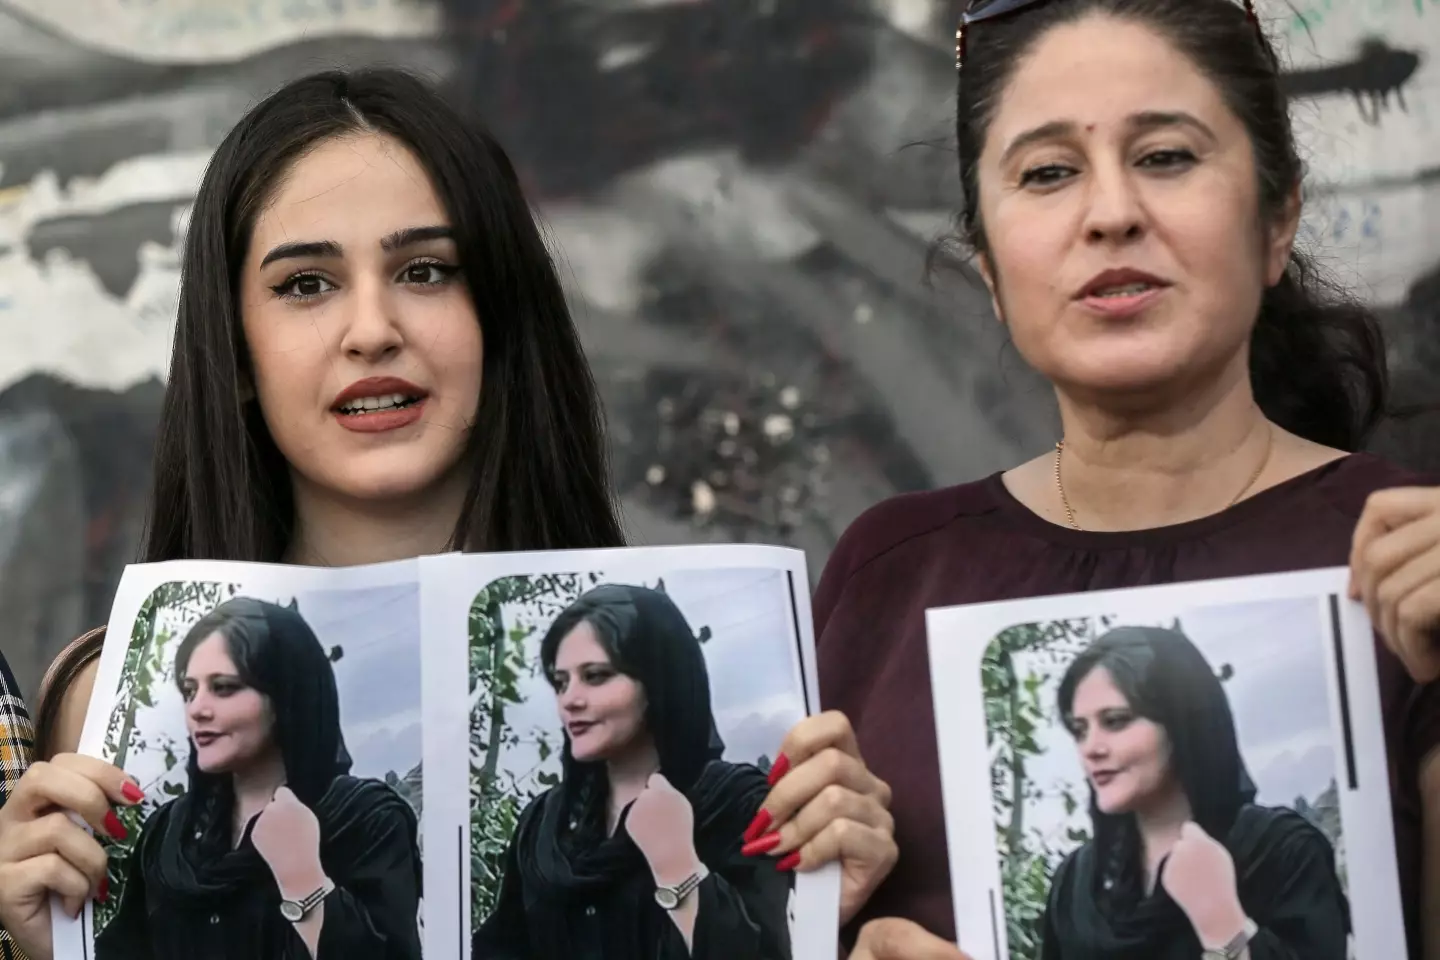 Kurdish women holding pictures of Mahasa Amini, the 22-year-old who died in police custody.